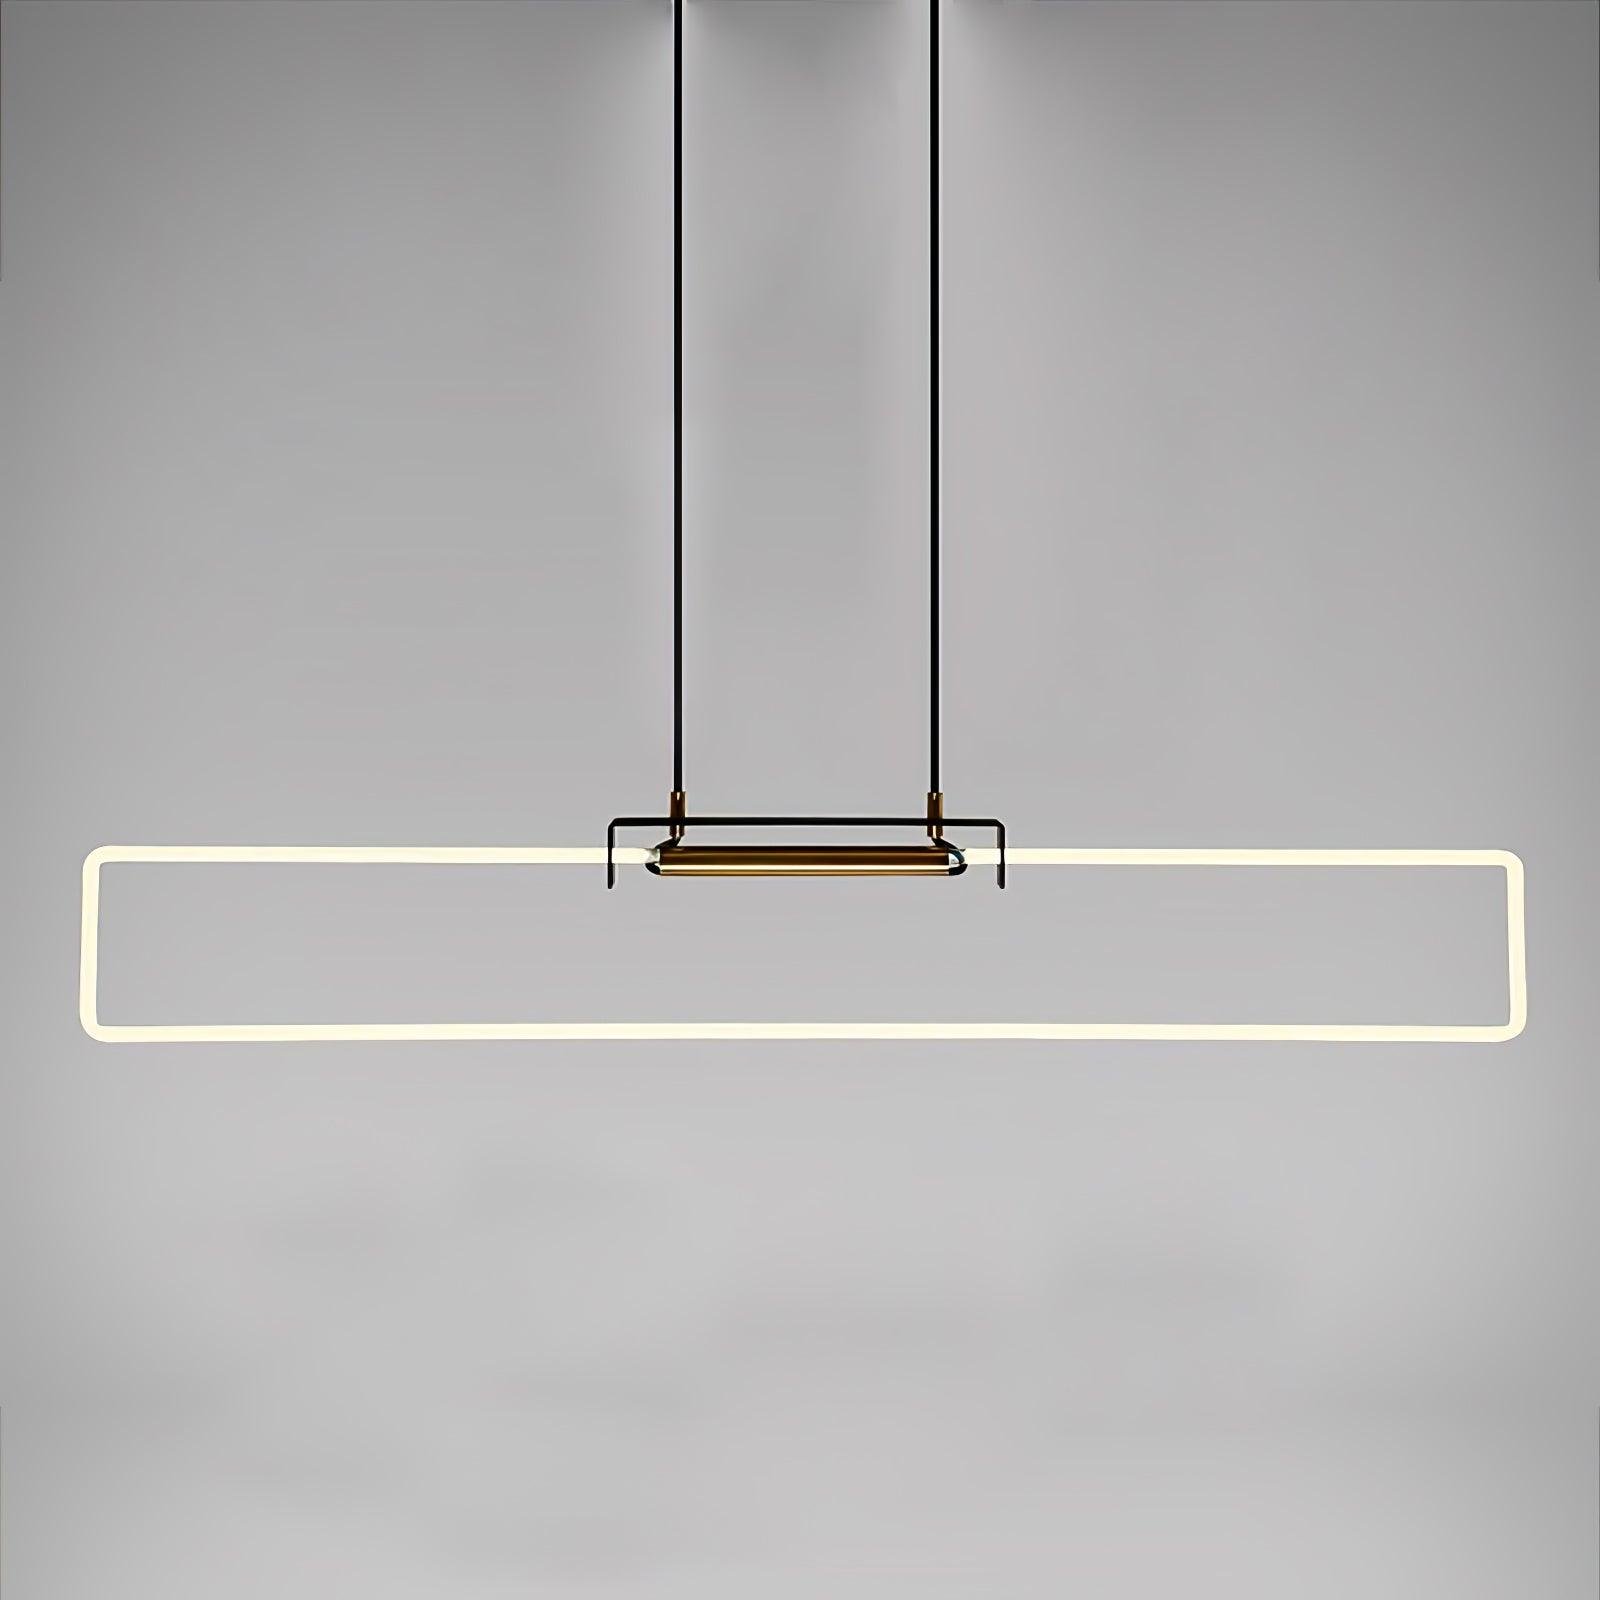 RA Pendant Lamp in White/Gold, Cool Light, with dimensions of L 55.1″ x H 7.9″ (L 140cm x H 20cm)